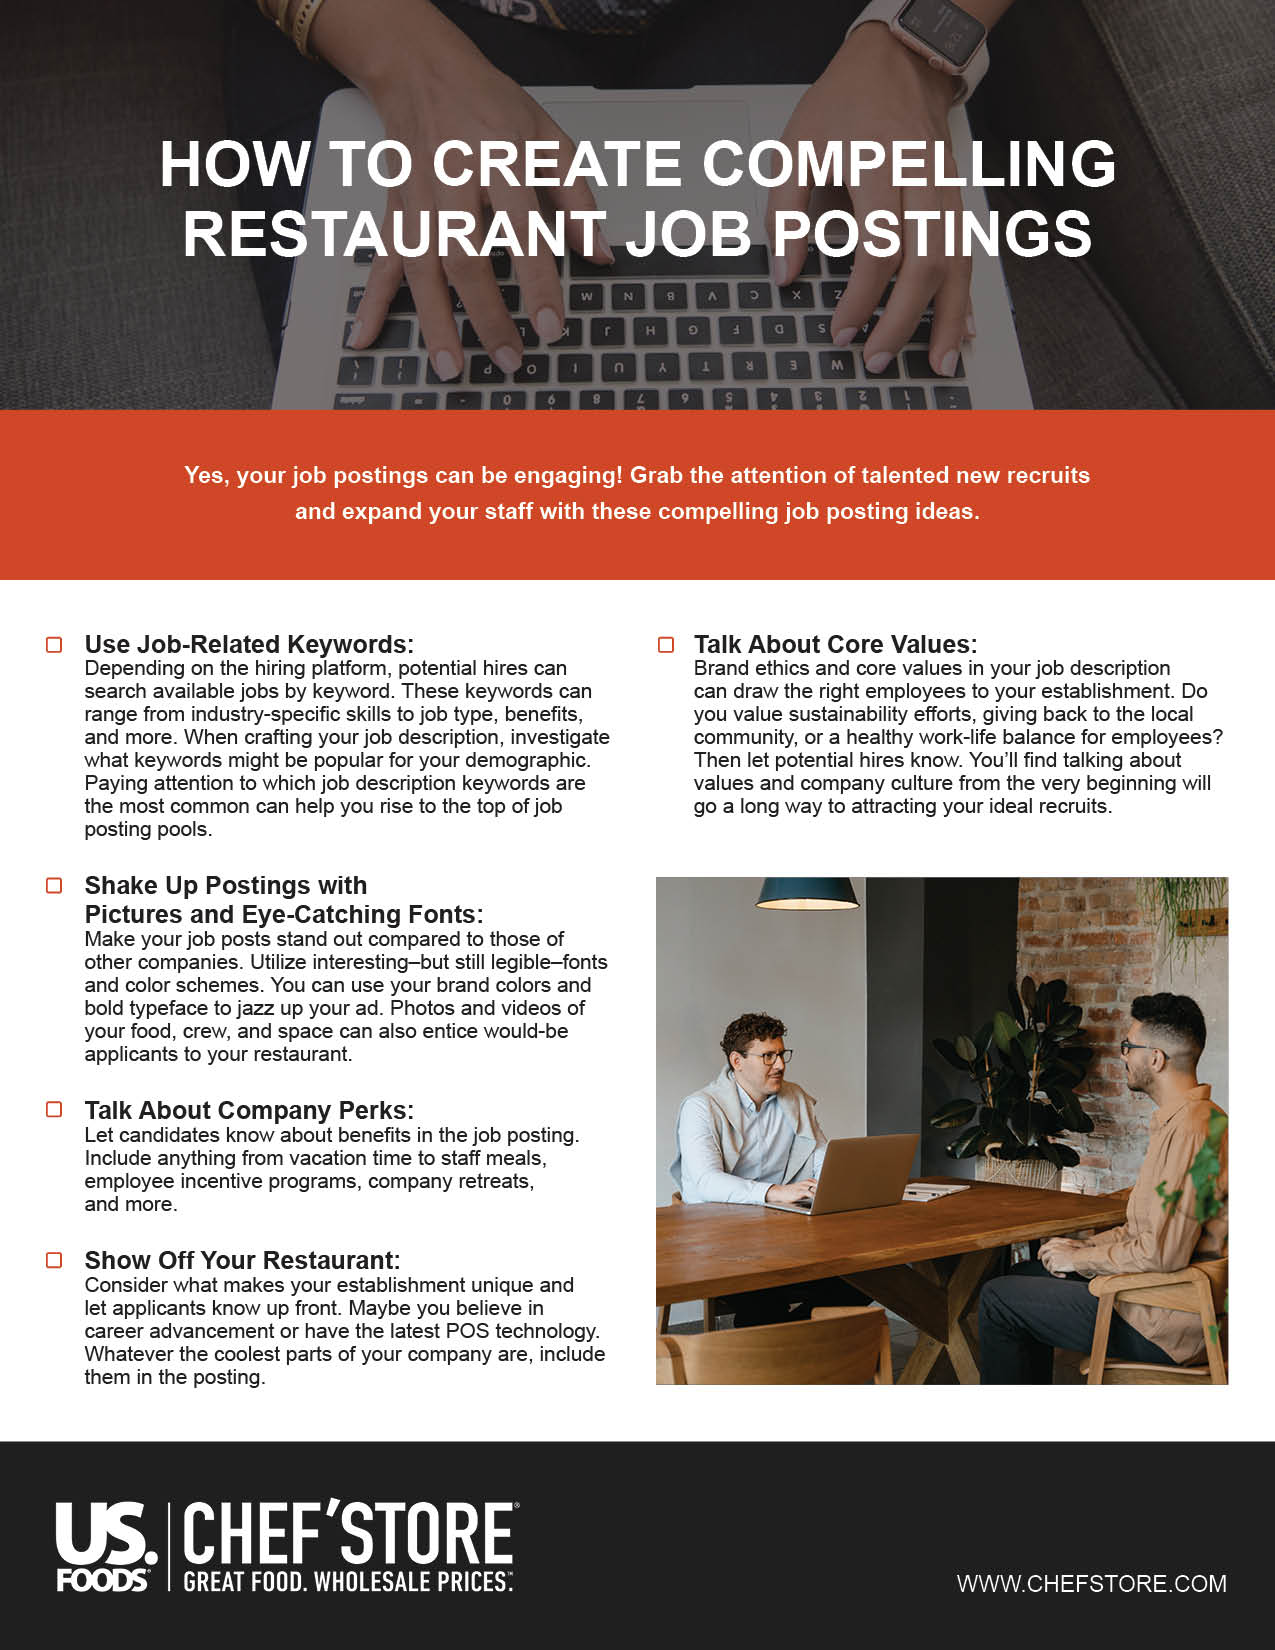 How to create compelling restaurant job postings checklist.